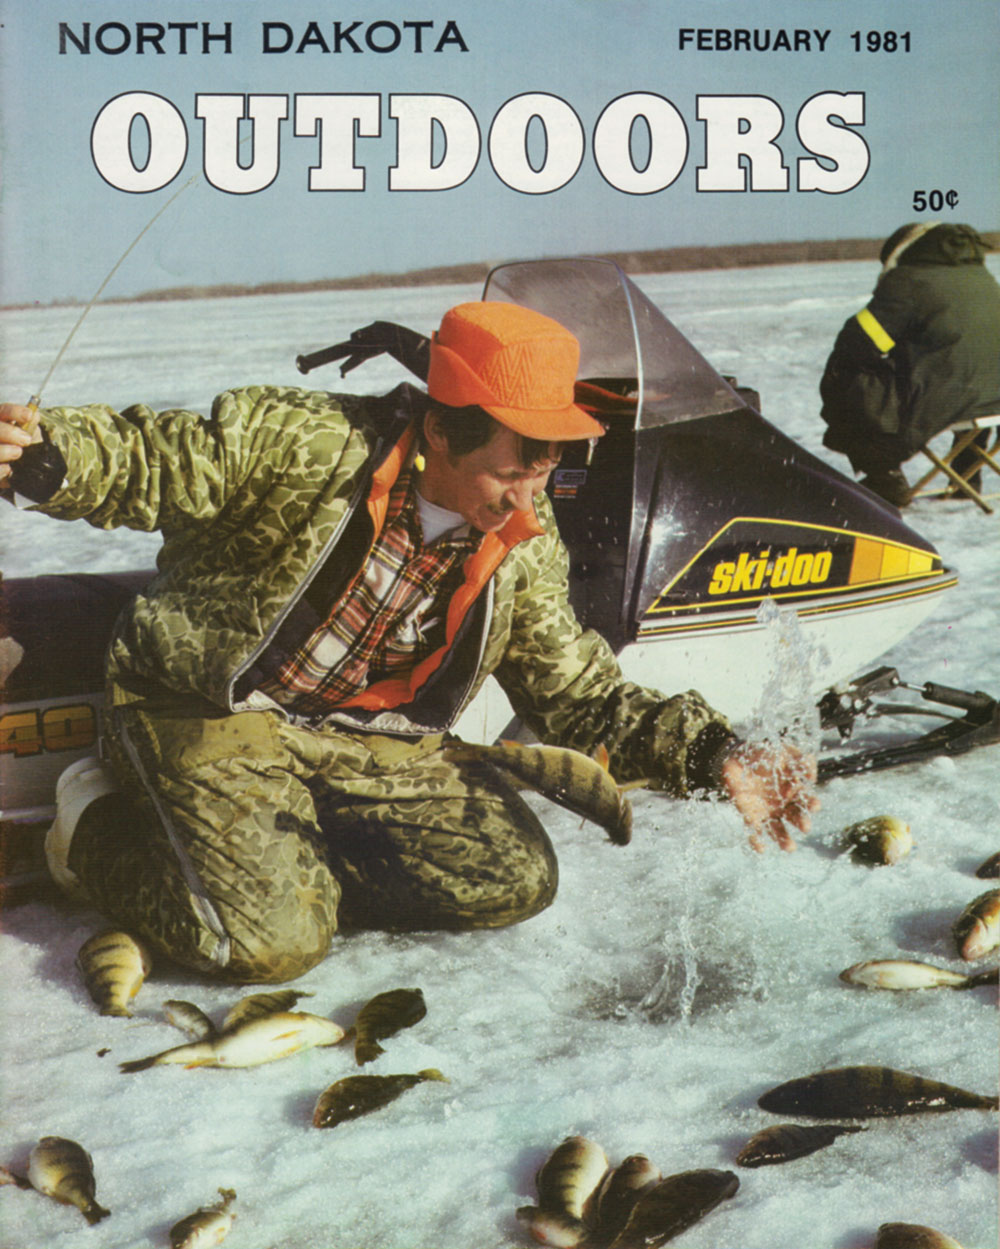 Cover of North Dakota Outdoors for the month of February 1981 